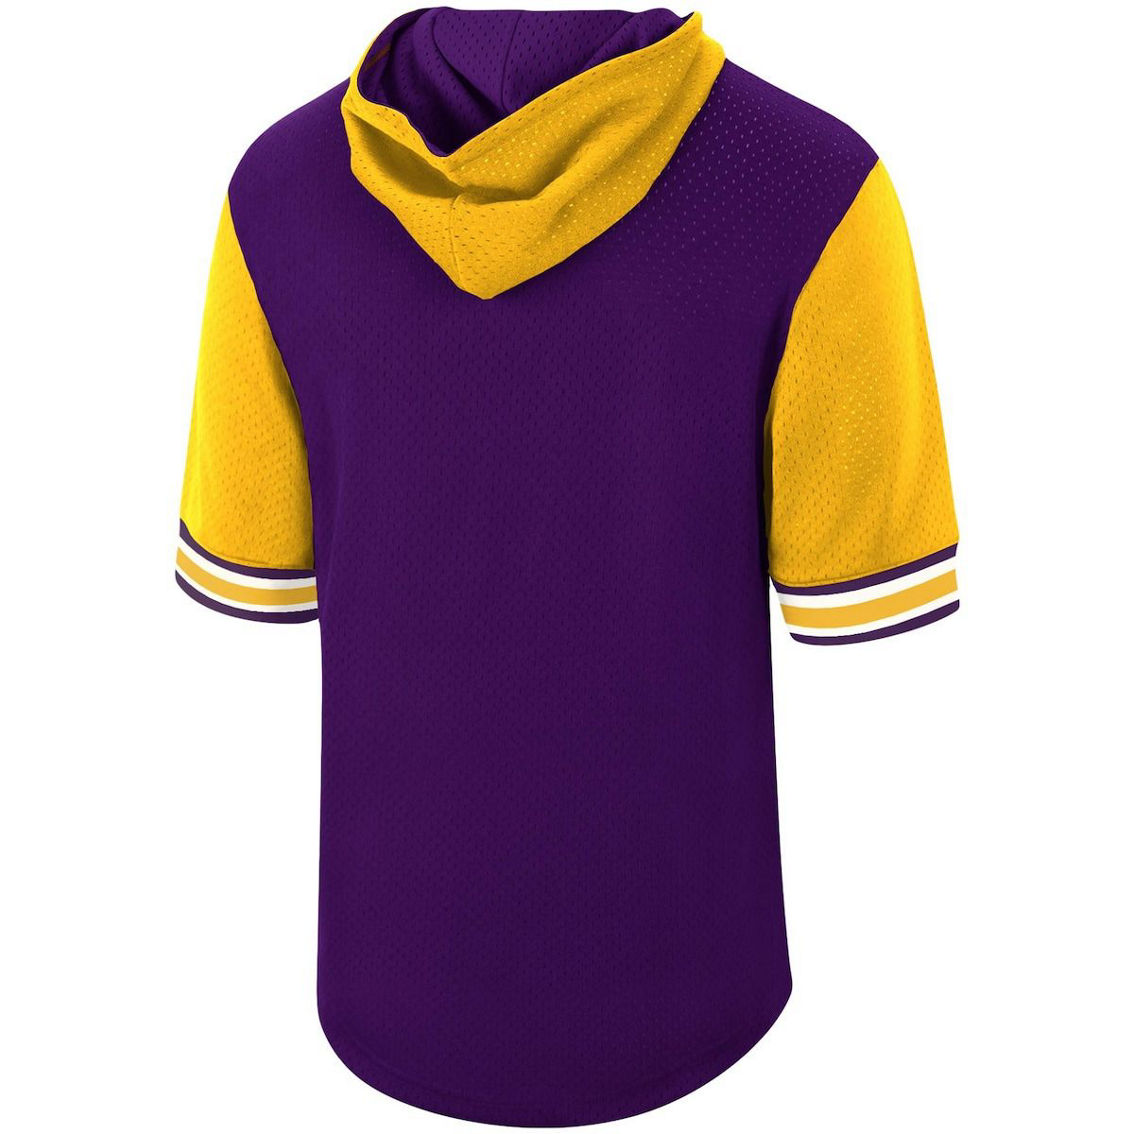 Mitchell & Ness Men's Purple Los Angeles Lakers Hardwood Classics Buzzer Beater Mesh Pullover Hoodie - Image 4 of 4